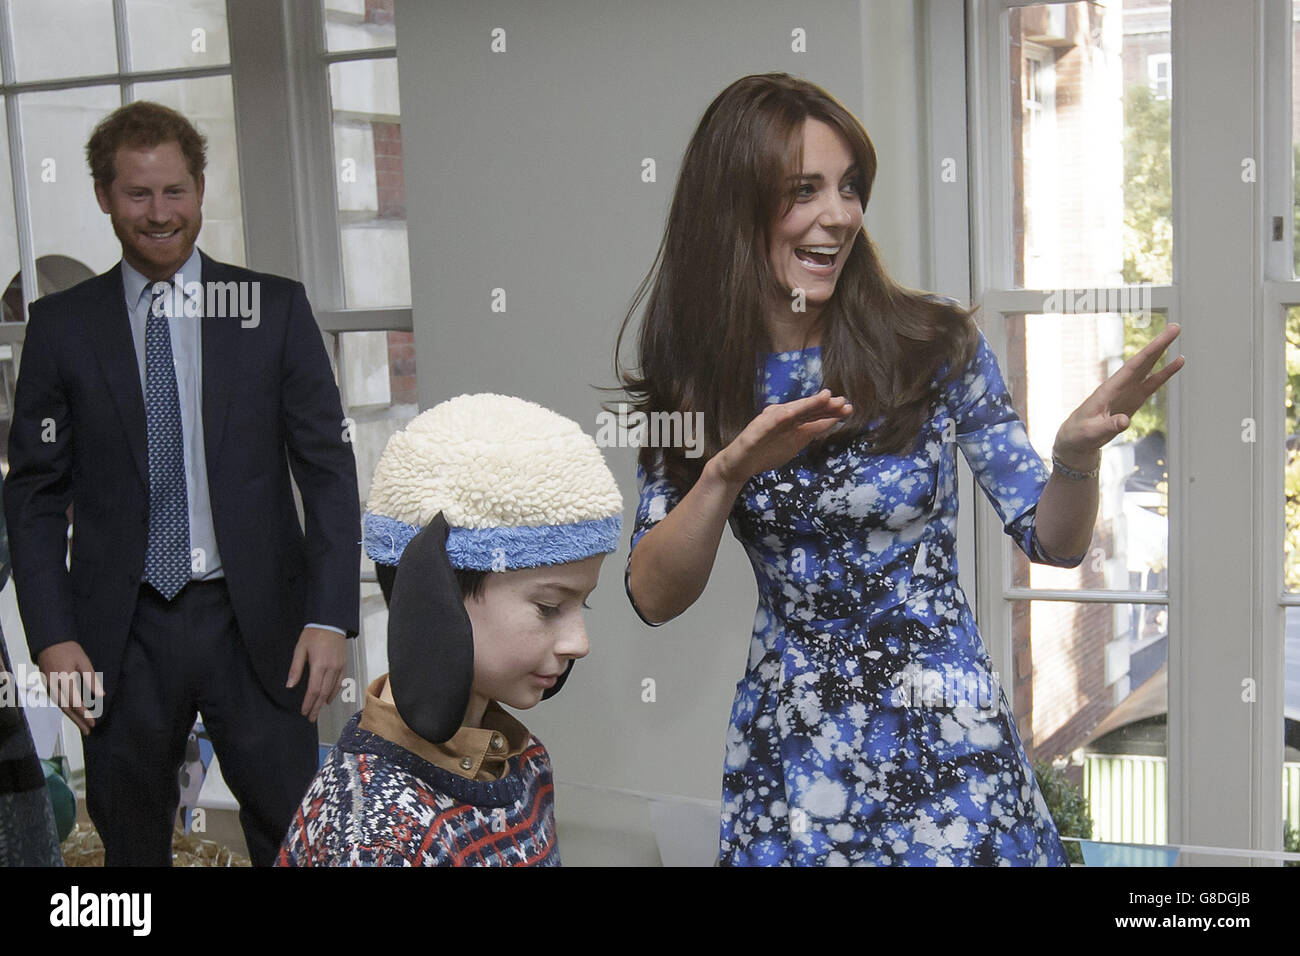 The Duchess of Cambridge takes part in welly wanging with children and representatives from charities and Aardman Animations, during a meeting of the Charities Forum at BAFTA on Piccadilly in London. Stock Photo